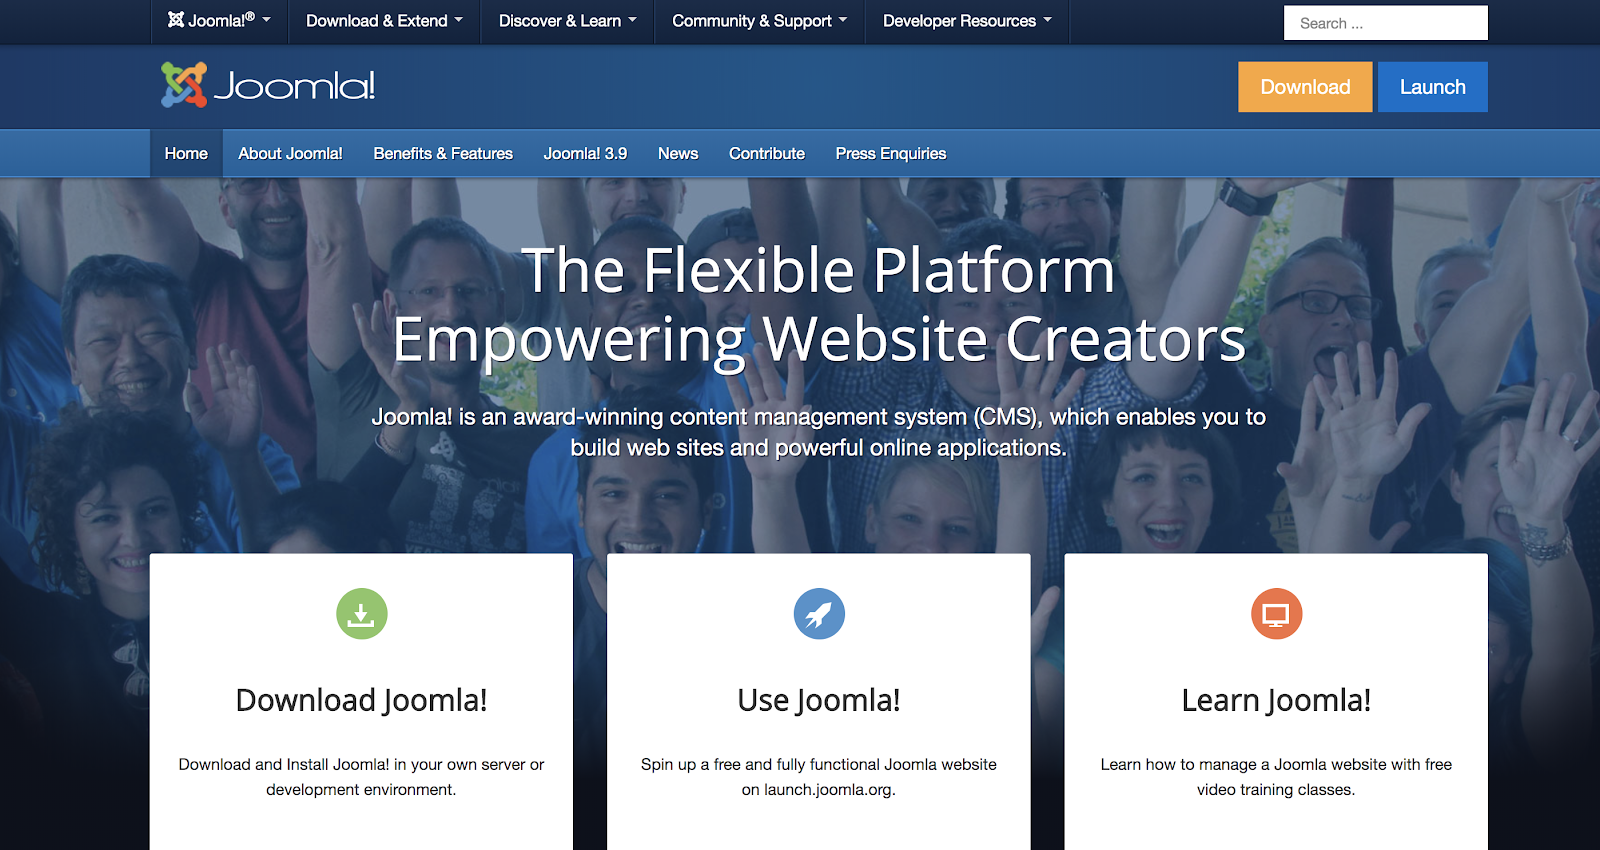 Joomla Self-Hosted Free Blogging Site to Use on a Budget